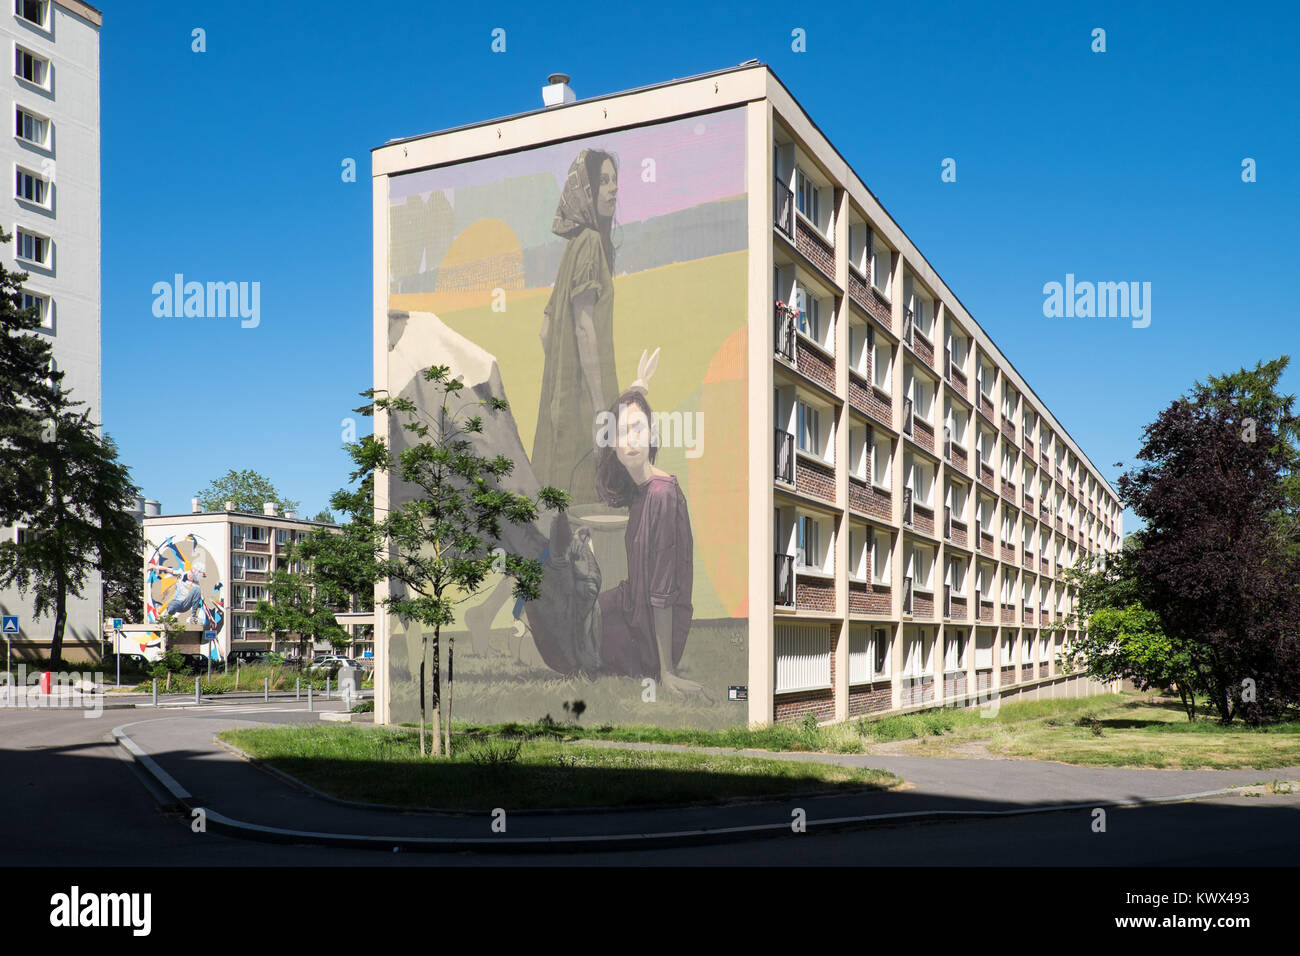 Rouen (Normandy, north-western France): mural, street art by the artist Sainer 'Countryside evening' on the Isigny building , 'rue d'Isigny' street, i Stock Photo